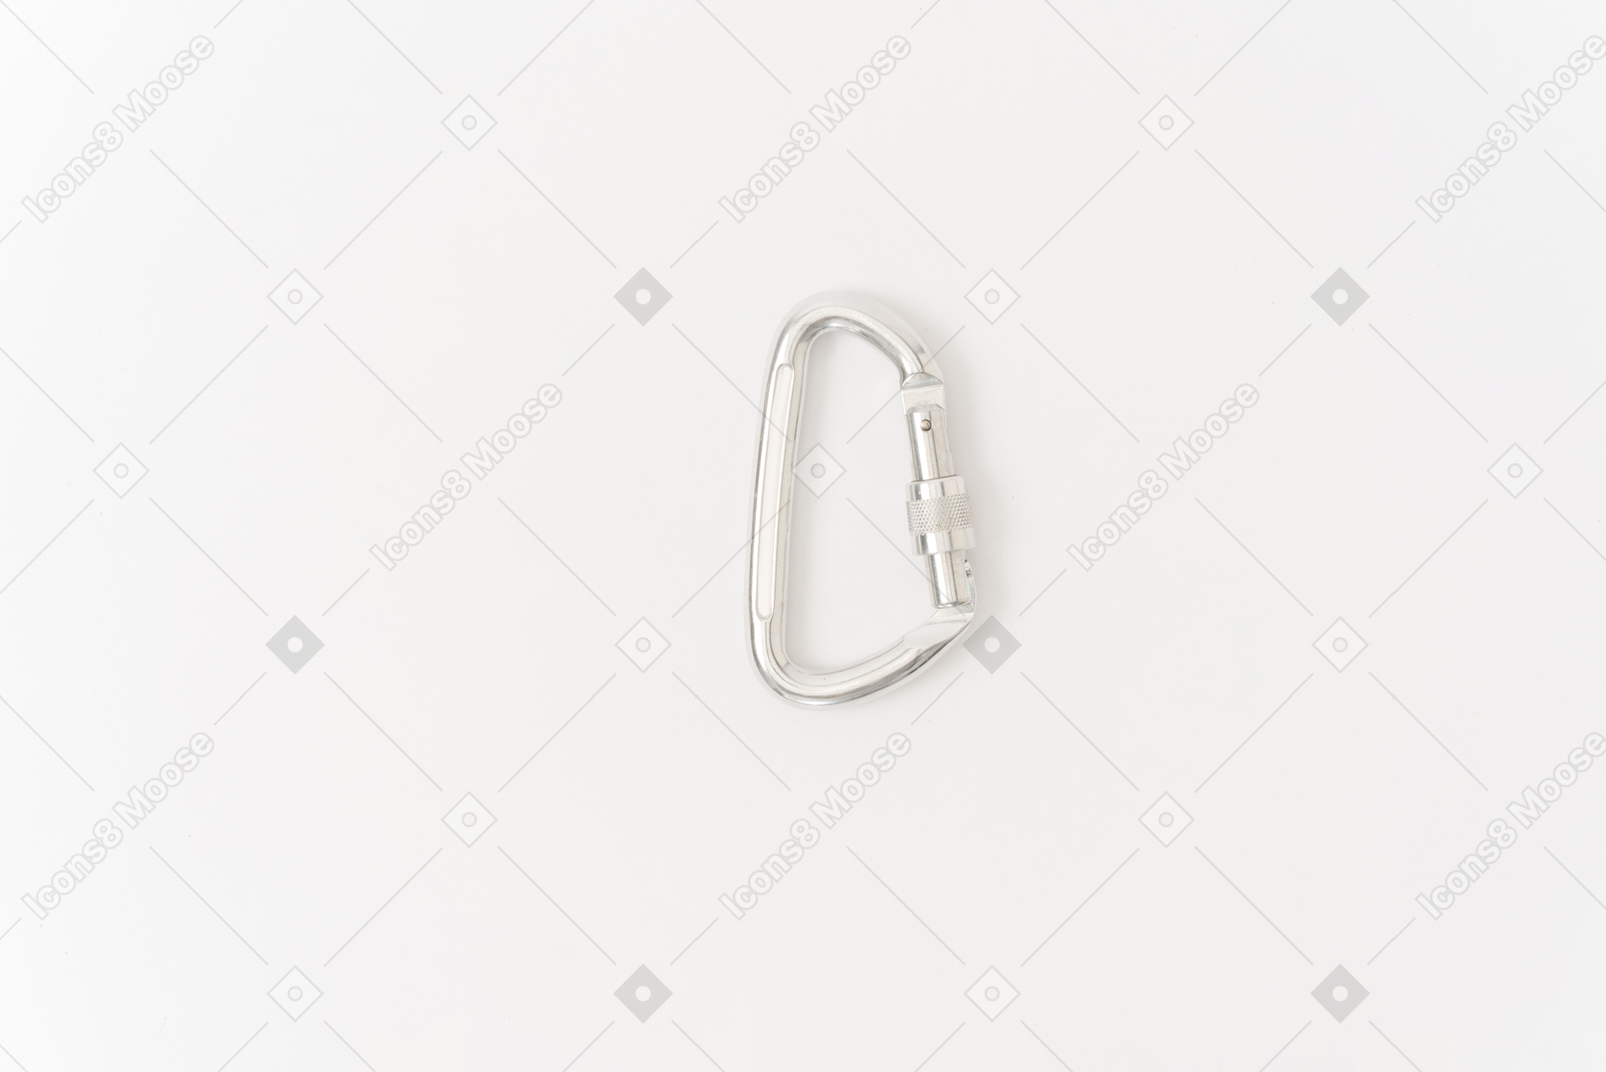 White carabiner on a white background